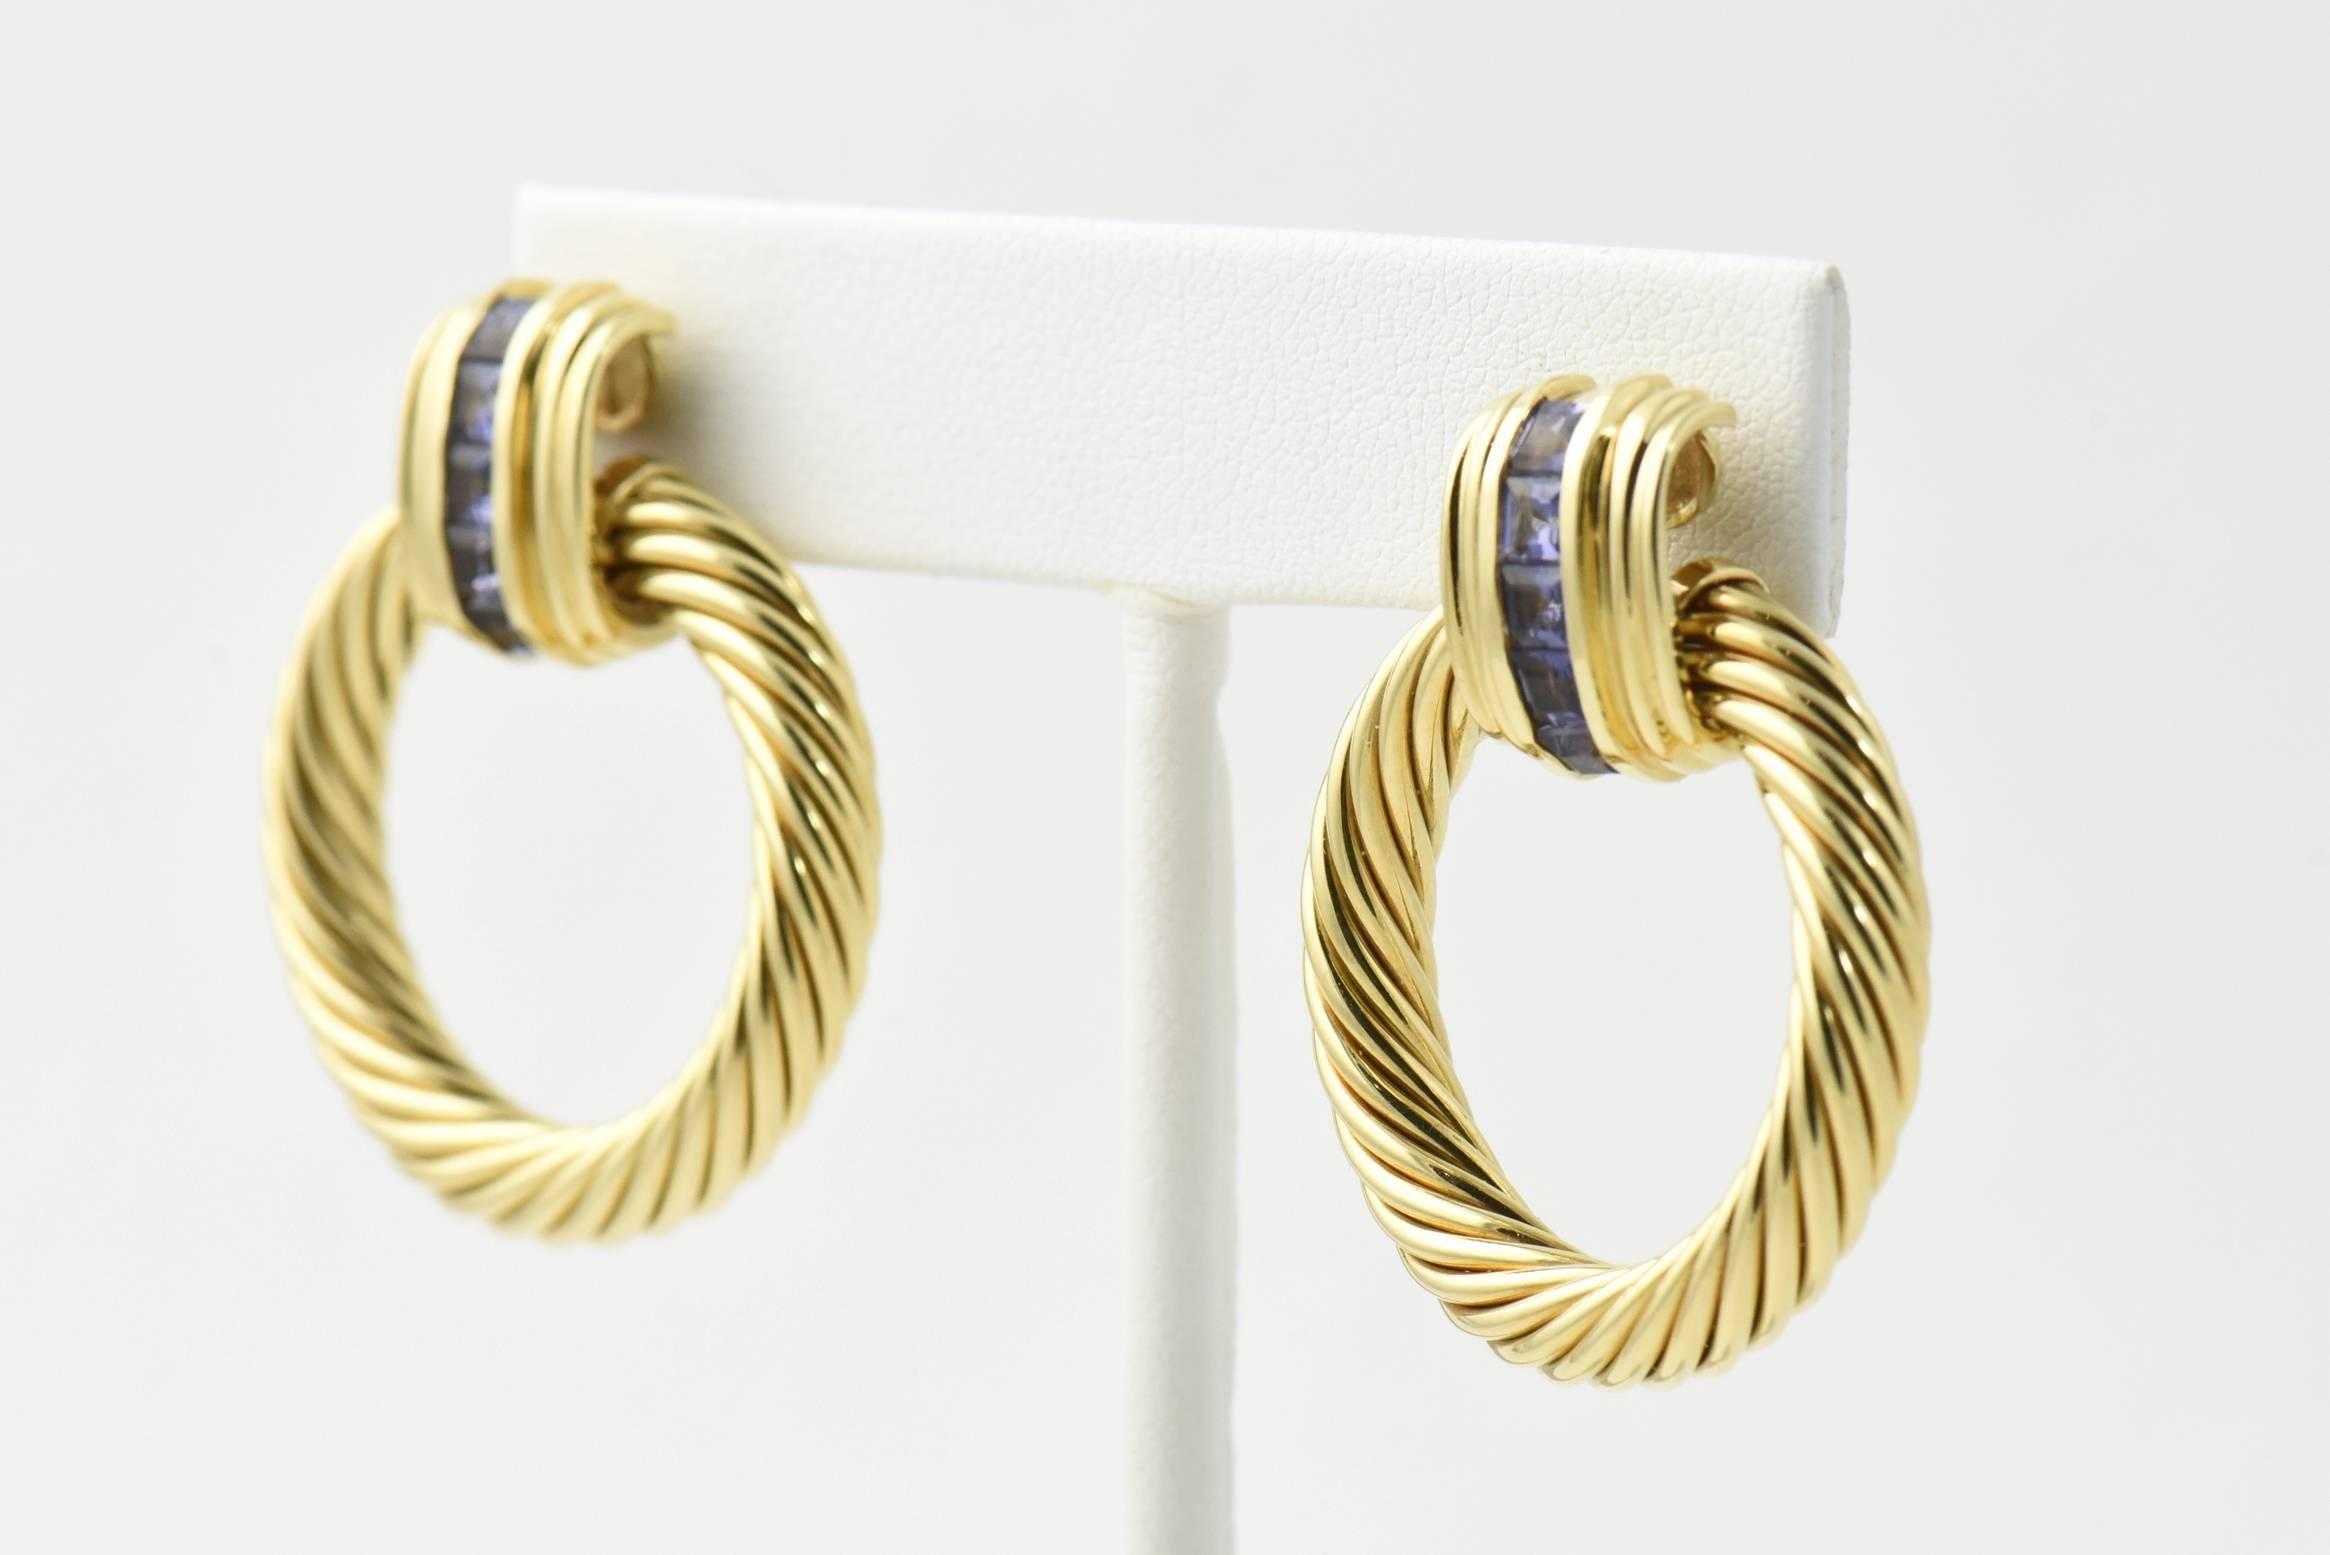 David Yurman 18k yellow gold door knocker earrings with detachable cable circles.  The top section can be worn with or without the bottom.  The center of the top section has a line of channel set sapphires.  Omega post backs.

Without hoops